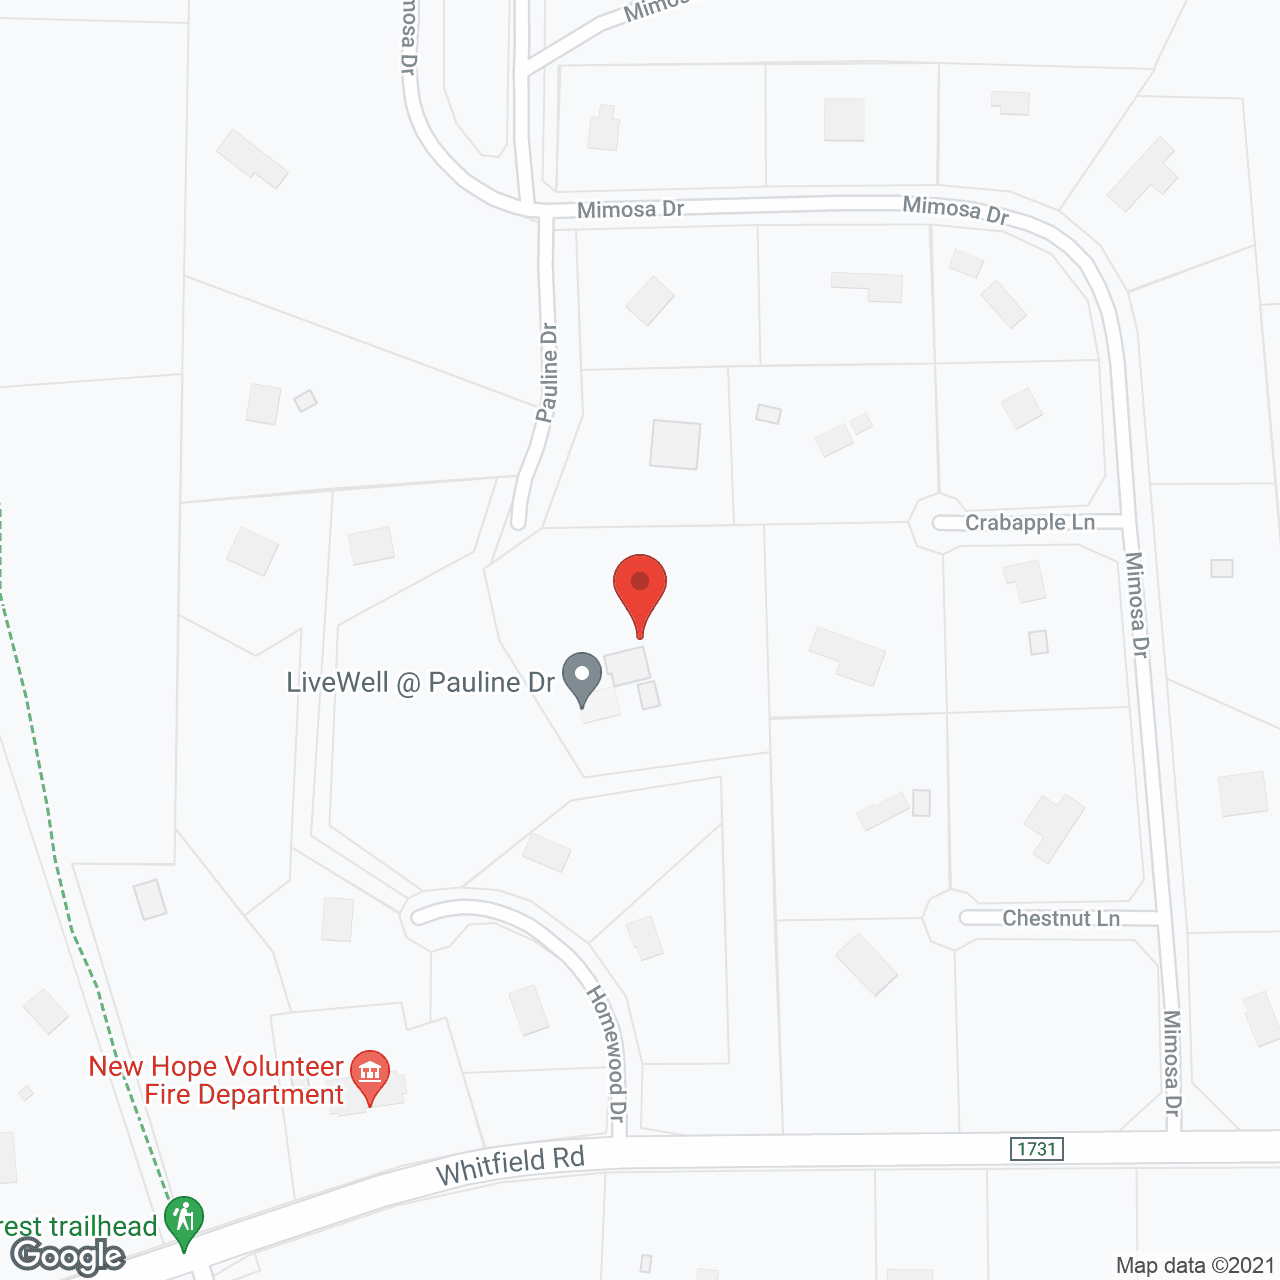 LiveWell Assisted Living in google map